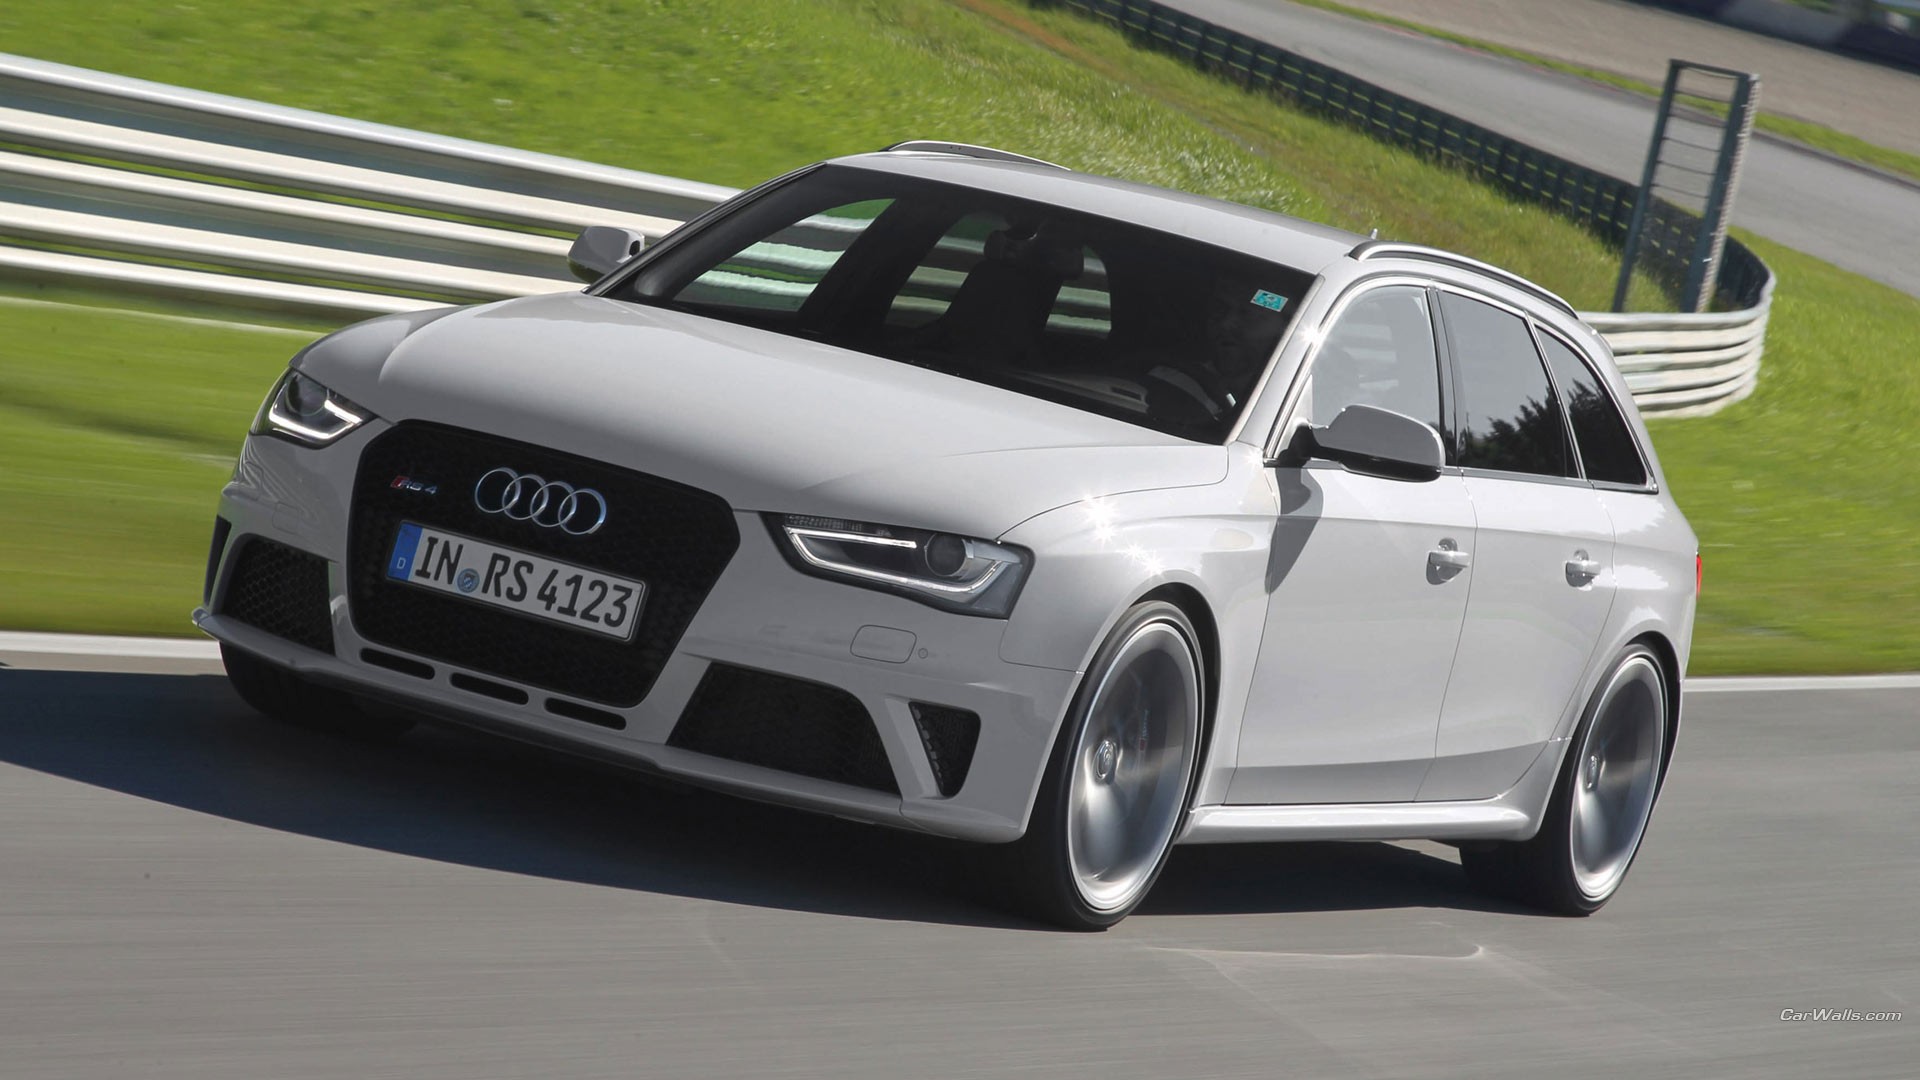 General 1920x1080 Audi RS4 Audi silver cars vehicle car station wagon German cars Volkswagen Group